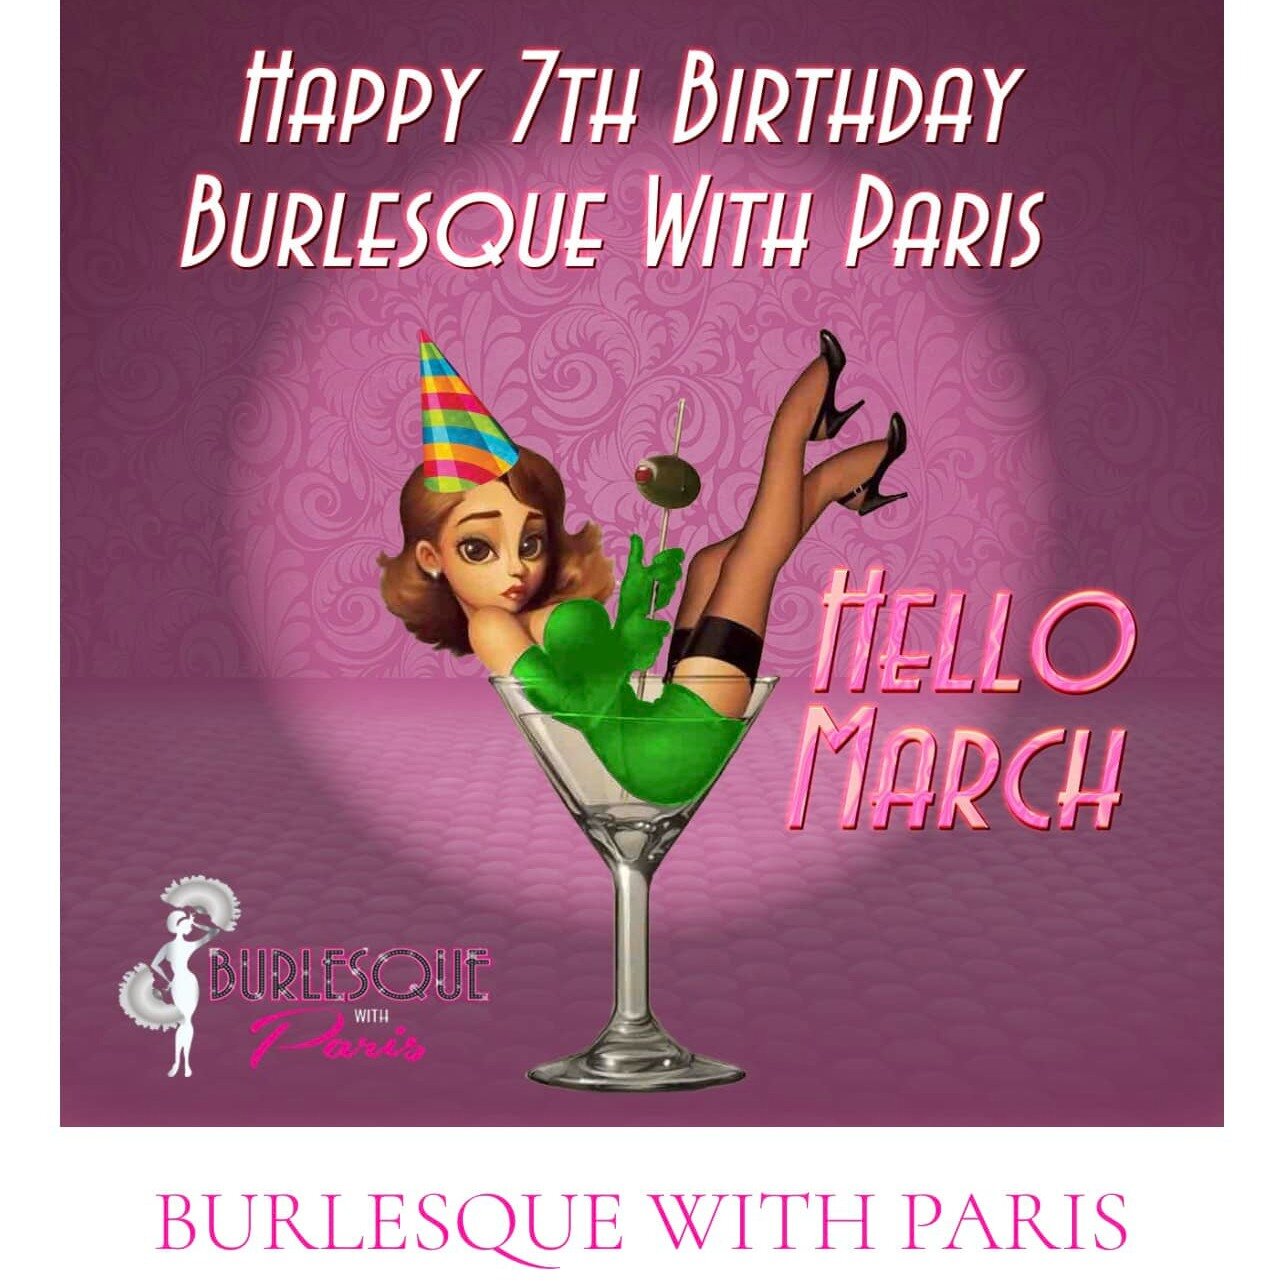 Hello March... 💖💕 

Our March Newsletter is out&hellip; Visit our website and read all about it...
burlesquewithparis.co.uk/blog/2024/3/1/burlesque-with-paris-newsletter-march-2024

#burlesque #burlesqueclass #burlesqueclasses #march #marchnews #ma